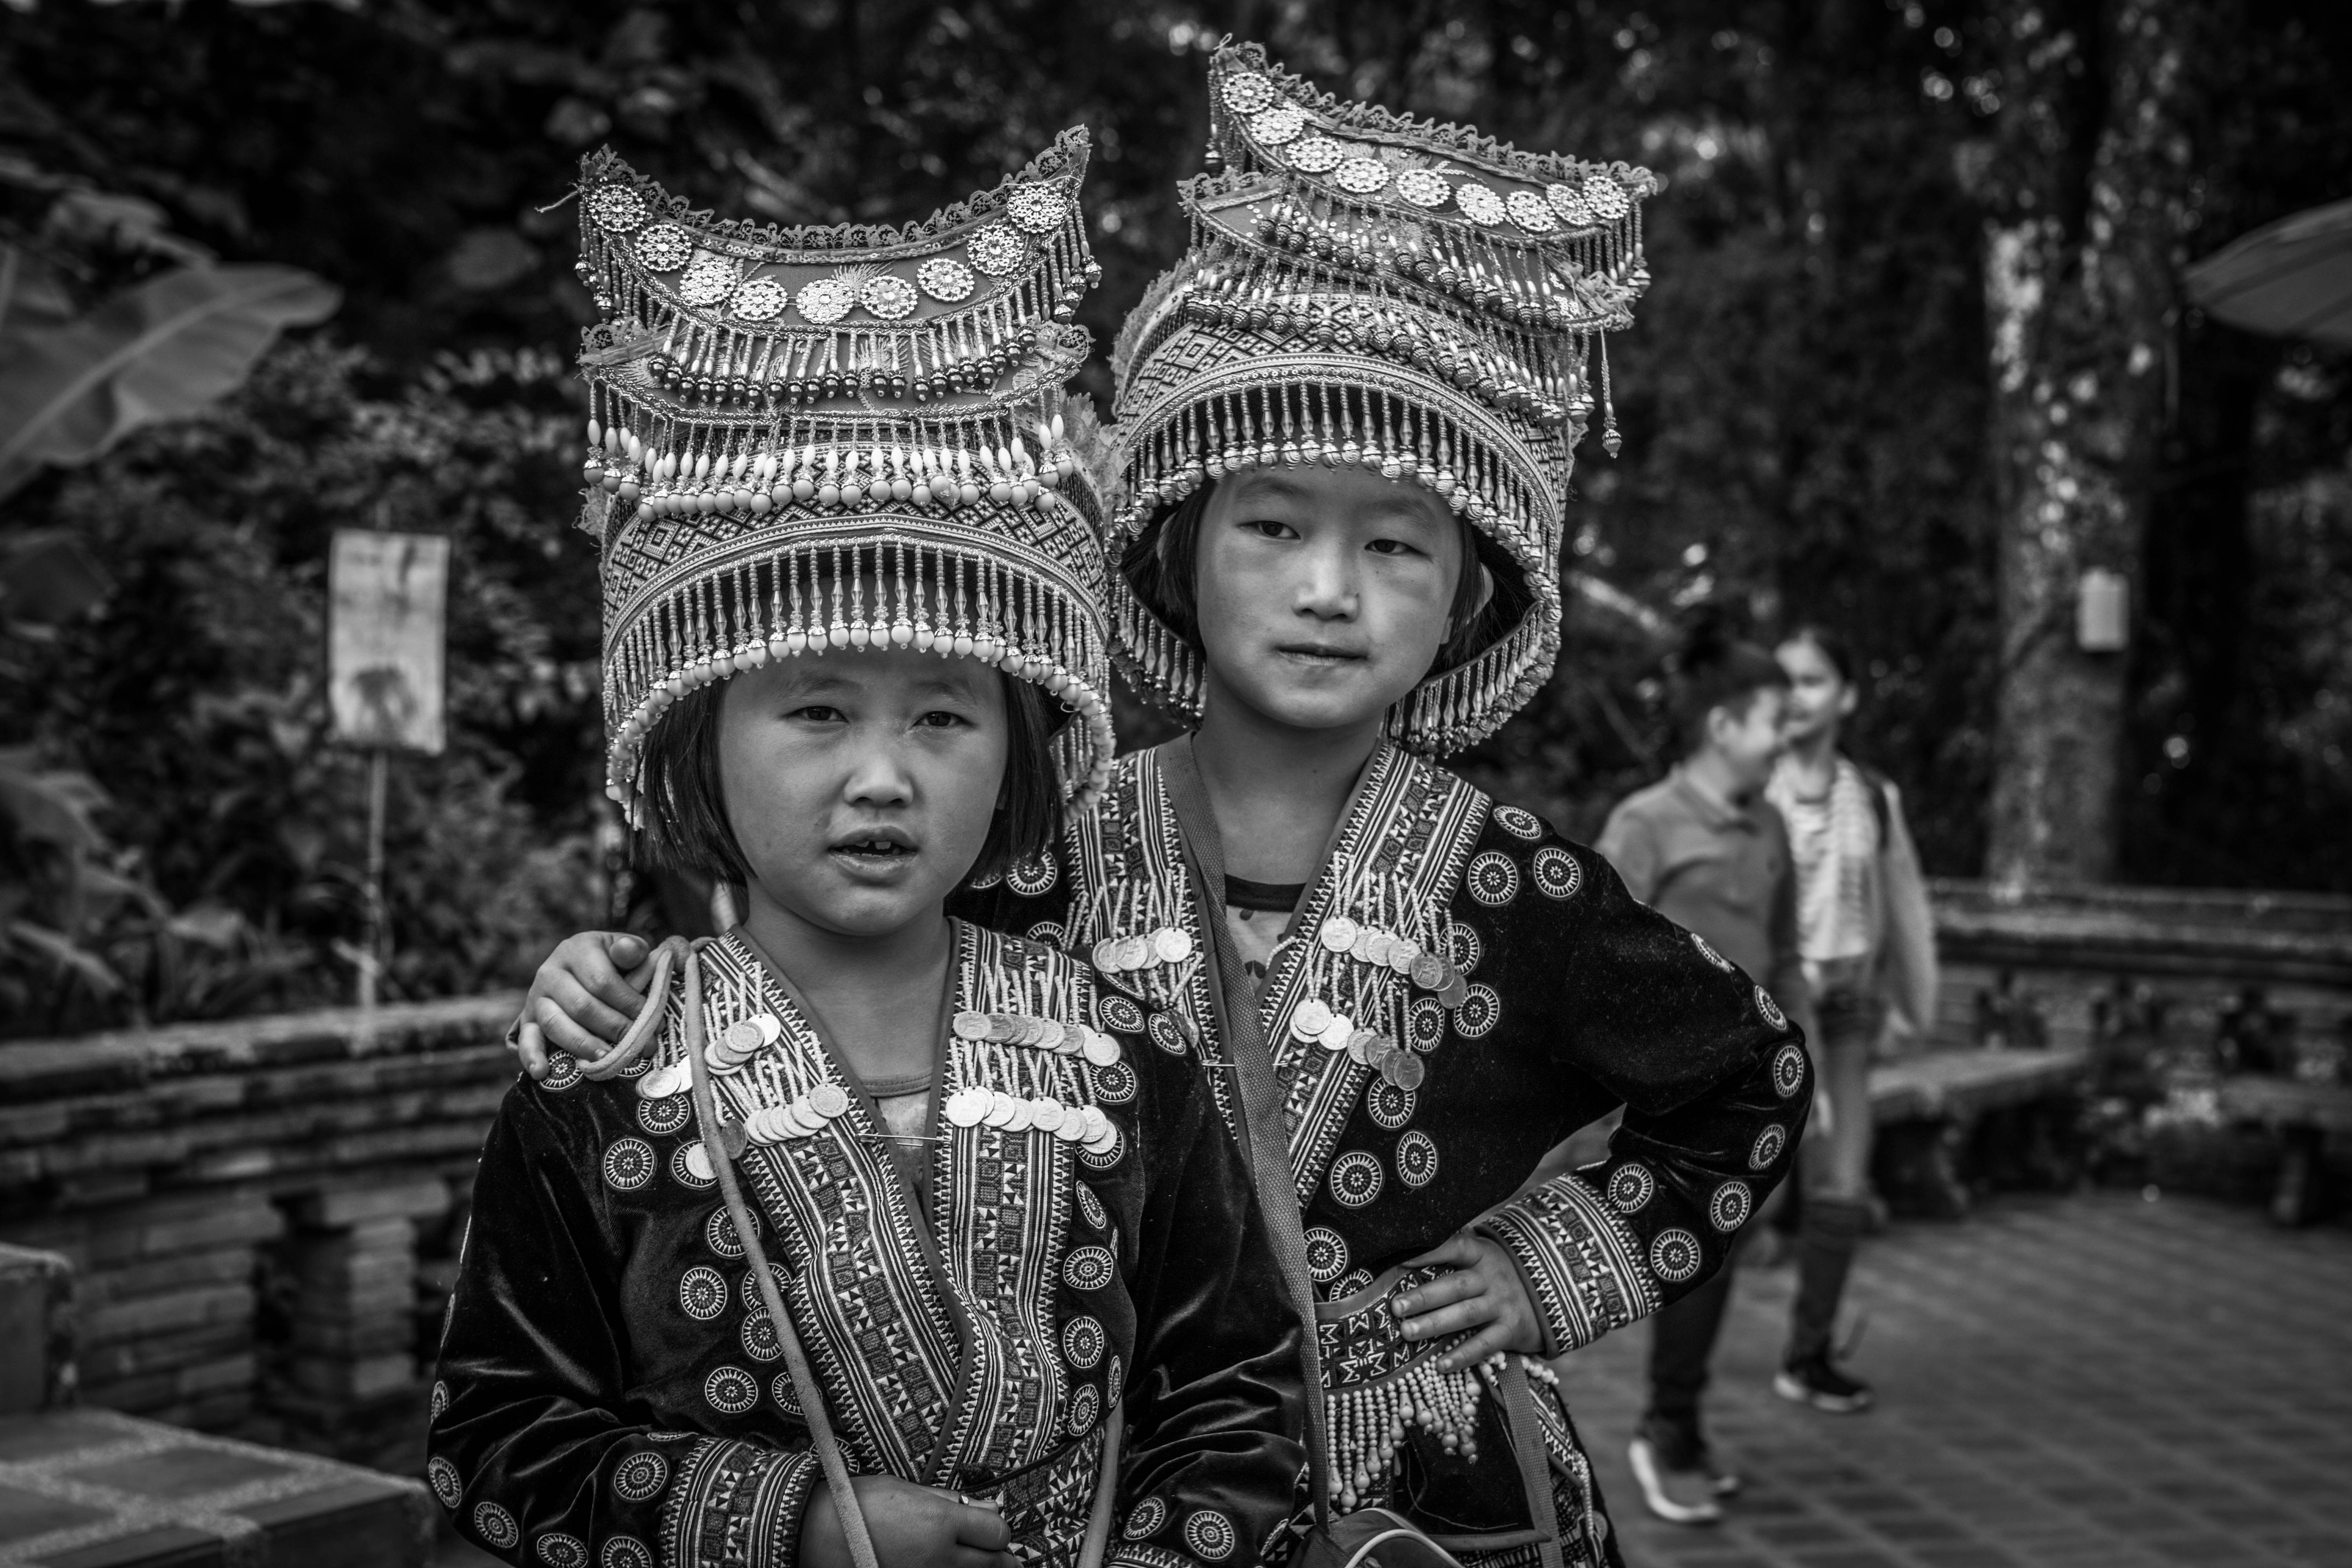 PEOPLE OF THAILAND